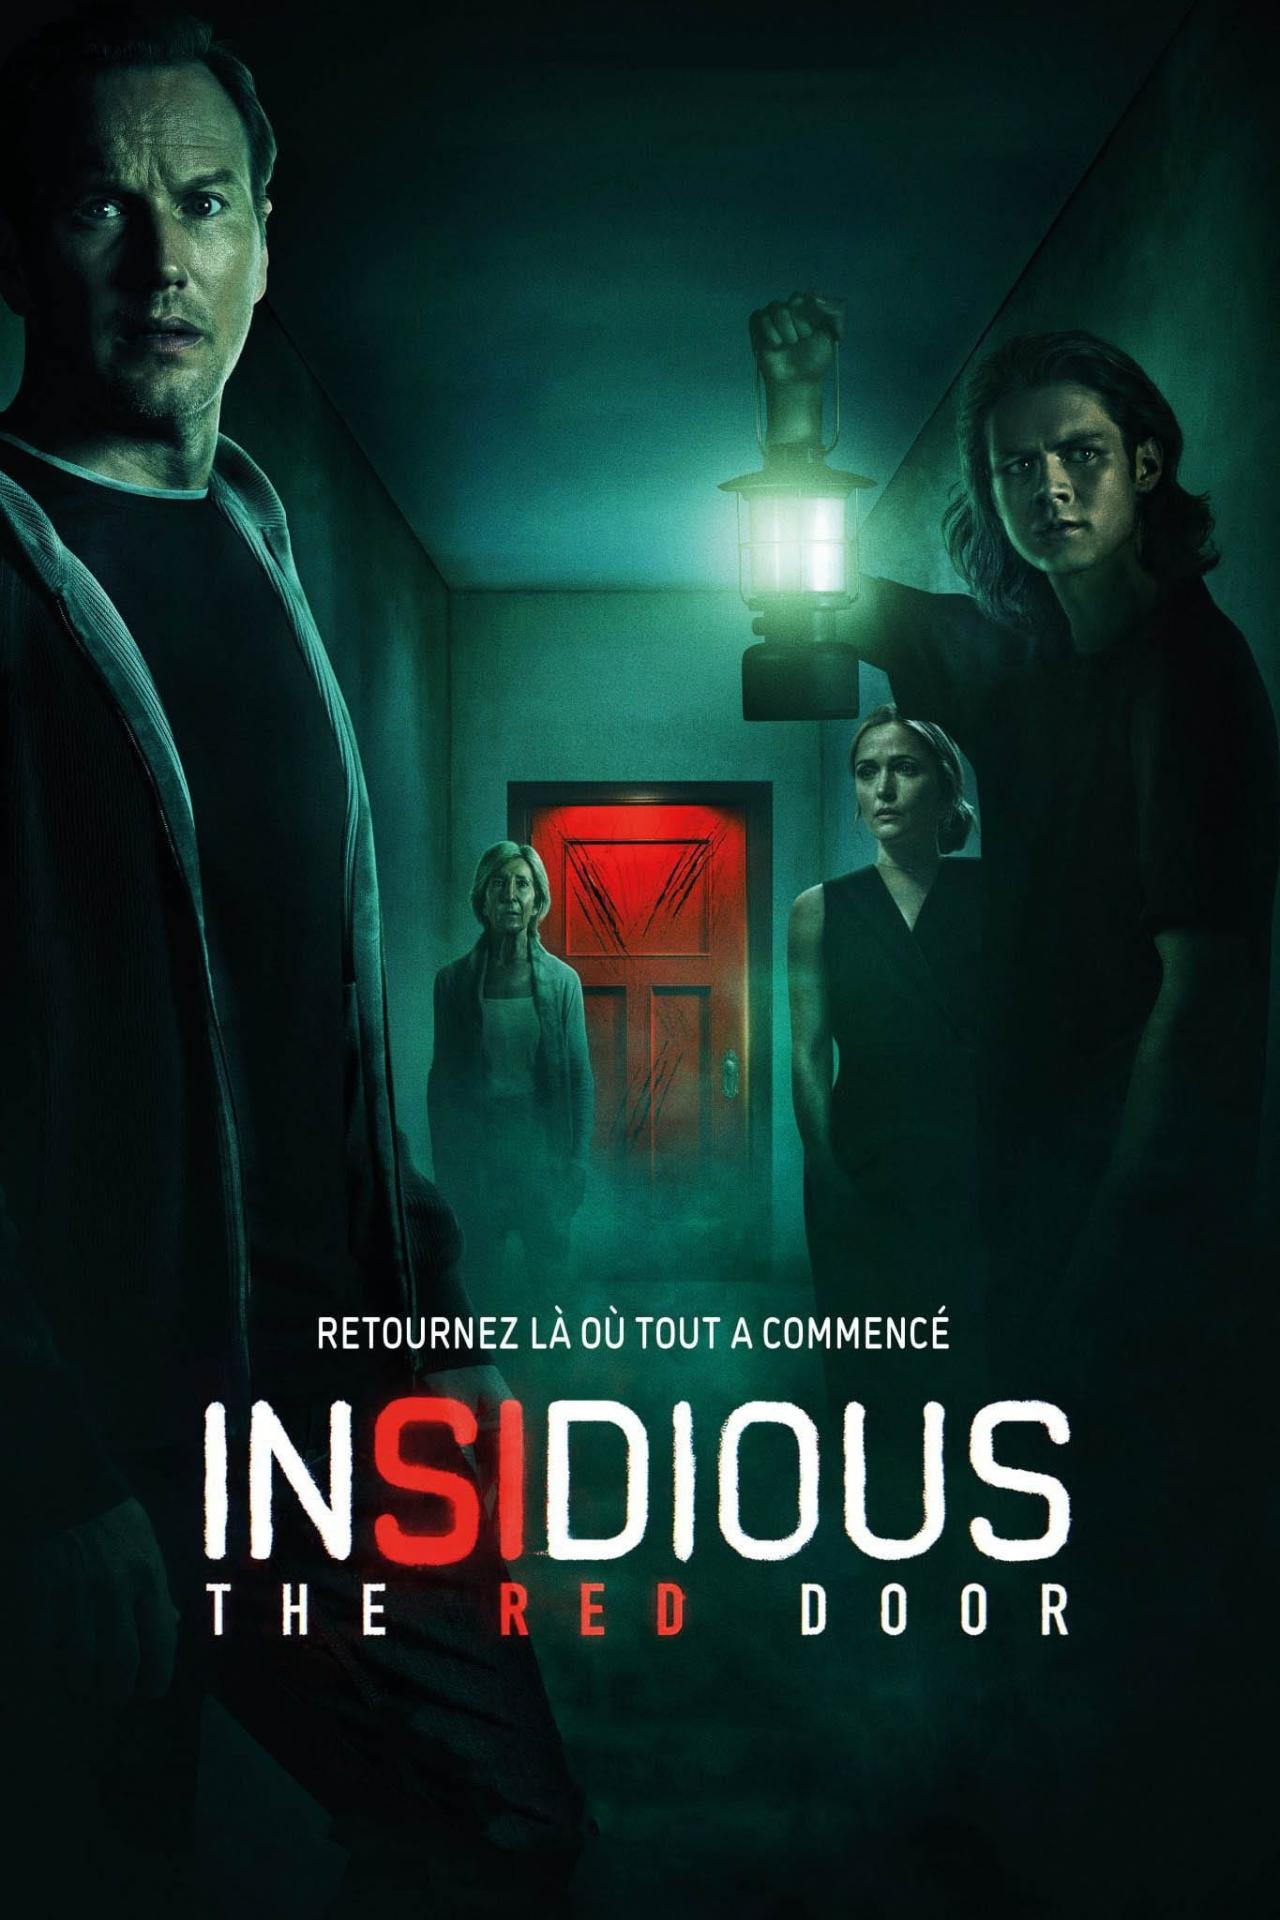 Affiche du film Insidious : The Red Door poster